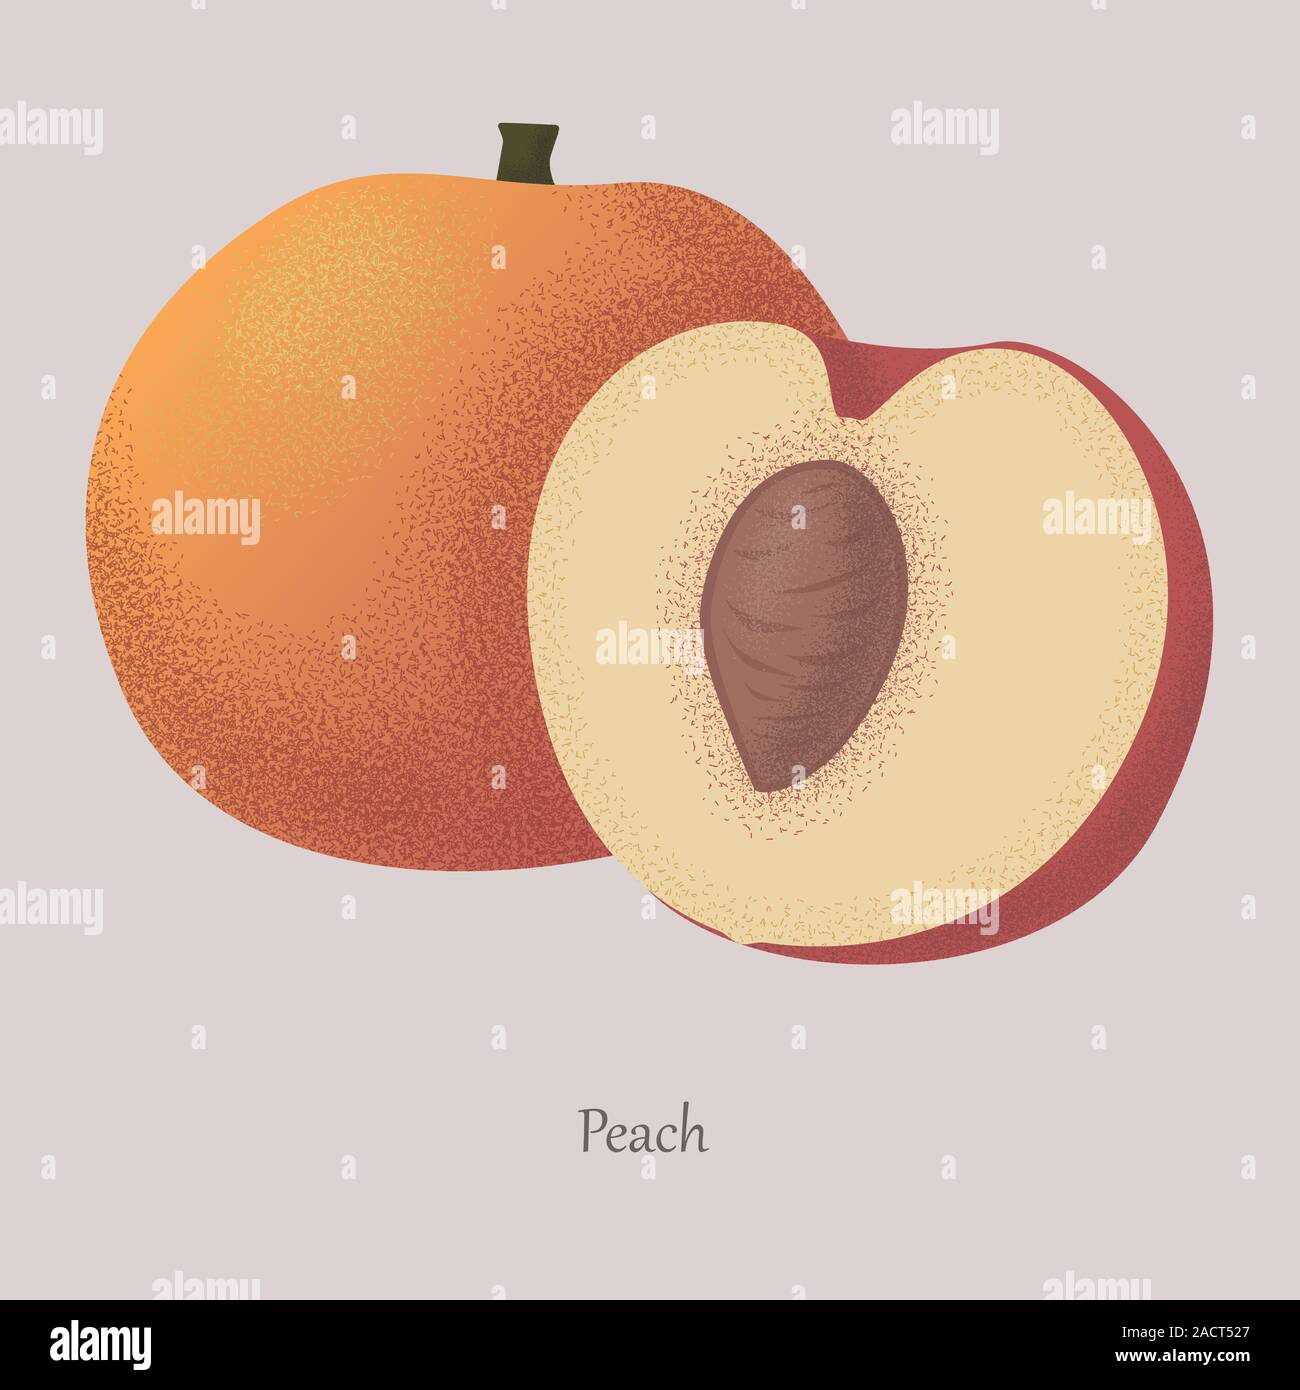 Ripe fruit peach cut in half and whole. Stock Vector